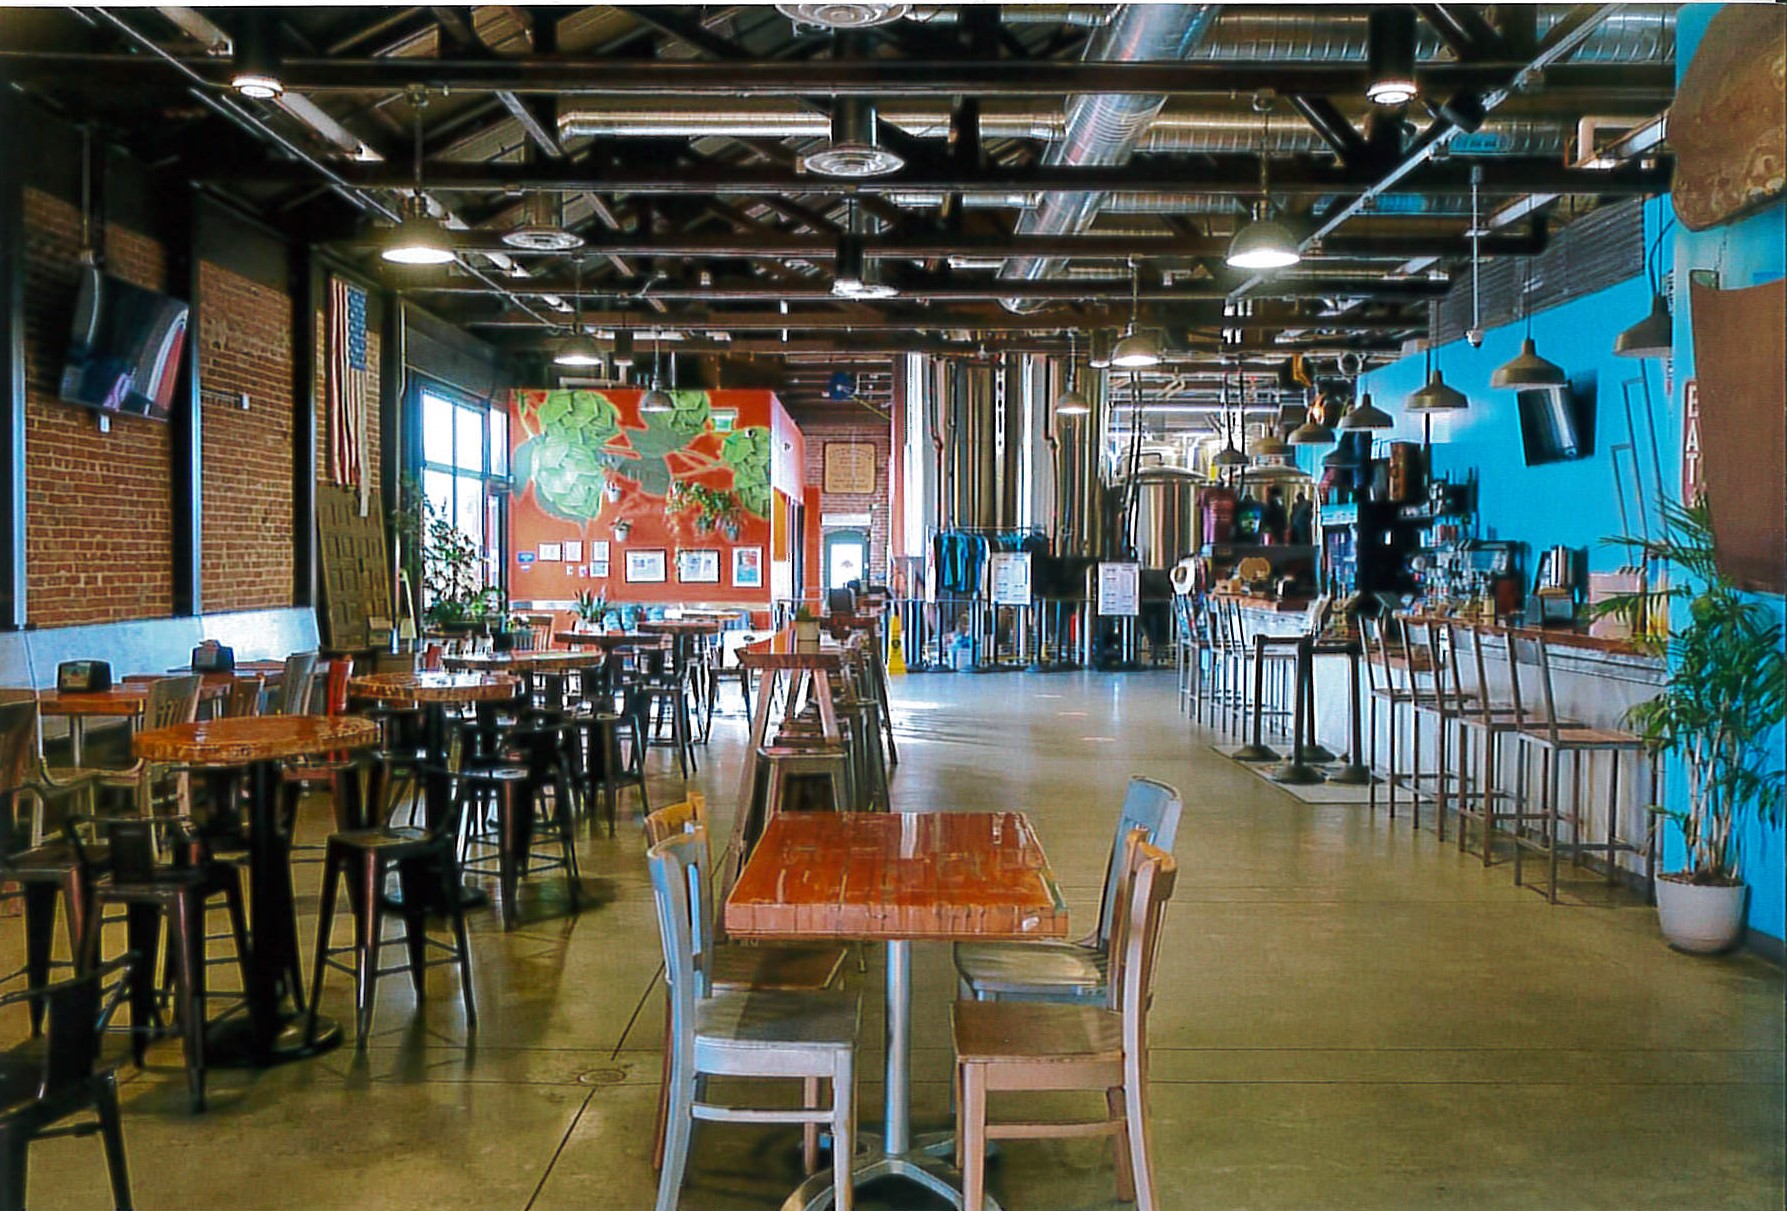 Interior view facing south showing restored flooring, exposed ceiling trusses and new brewery equipment